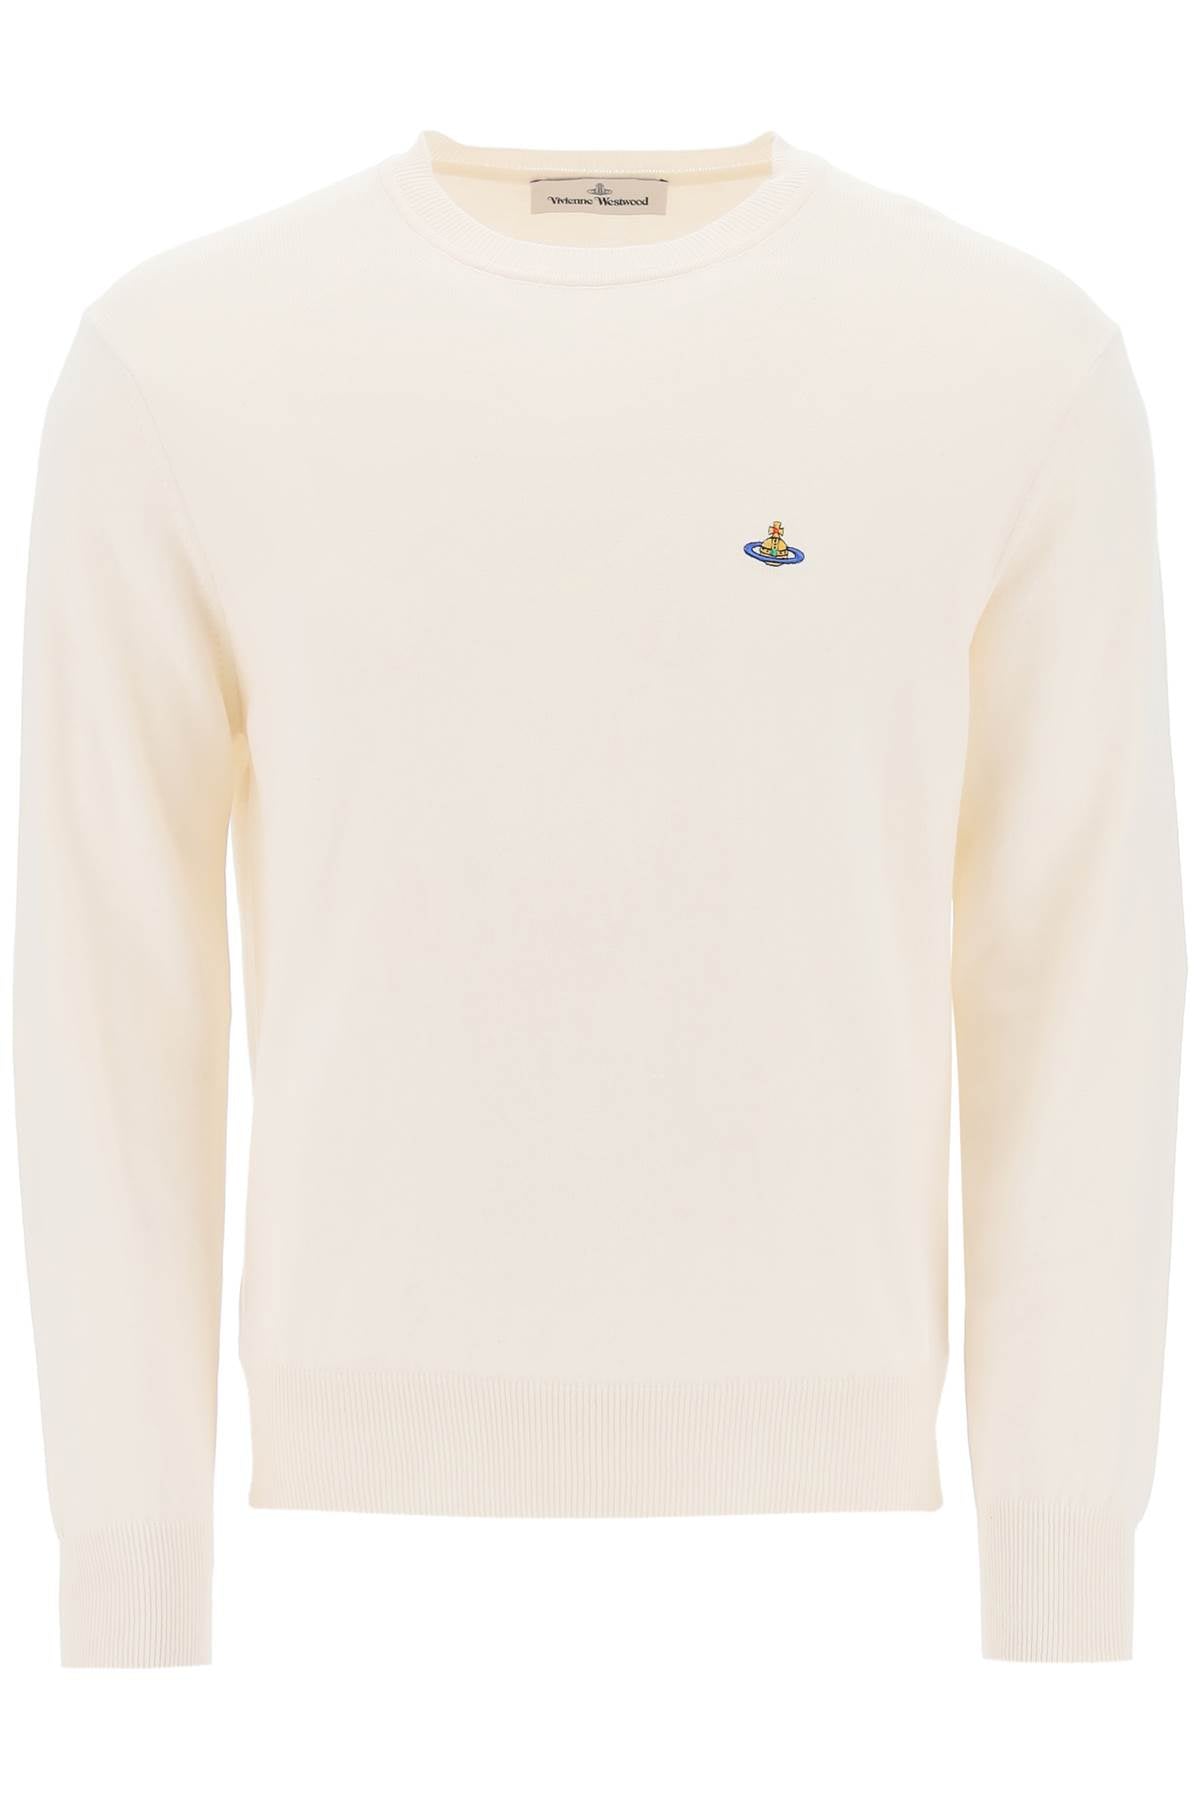 Vivienne westwood organic cotton and cashmere sweater 2701000OY0010 CREAM